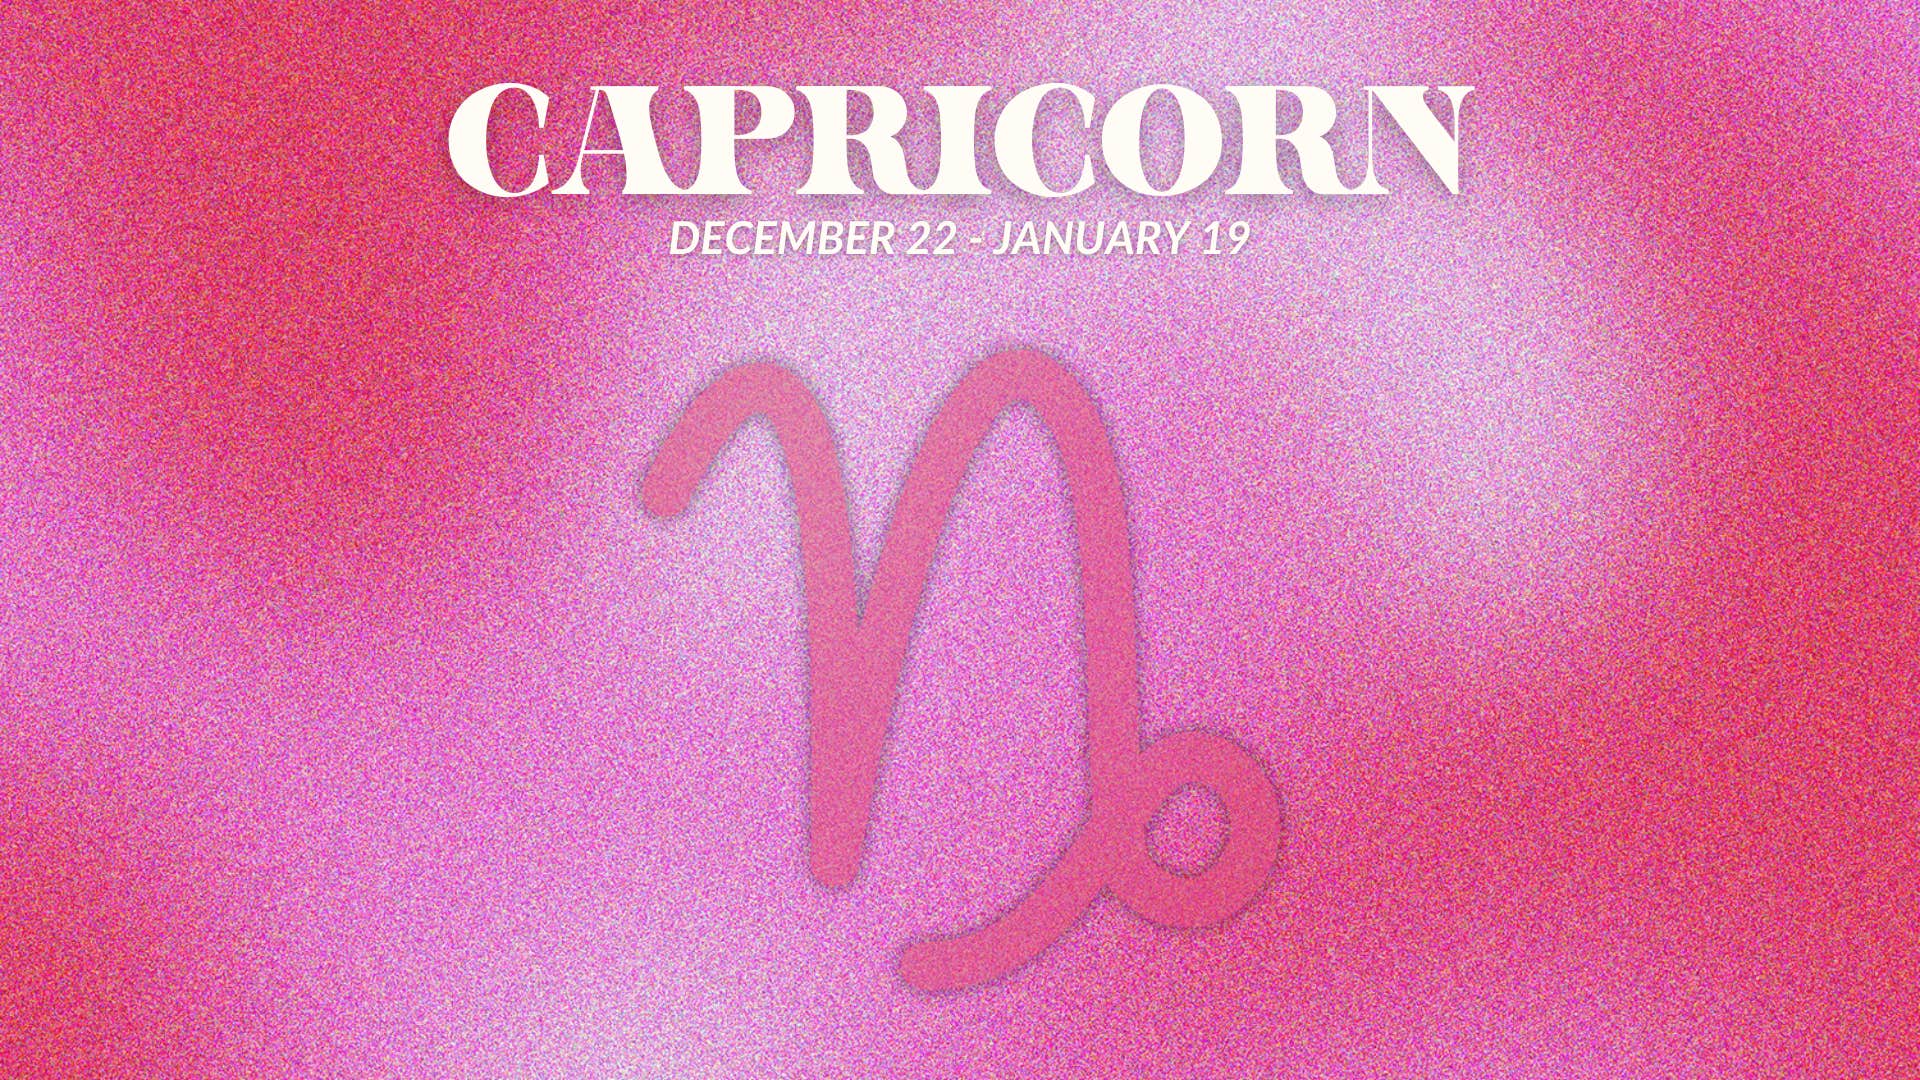 biggest relationship fear for capricorn